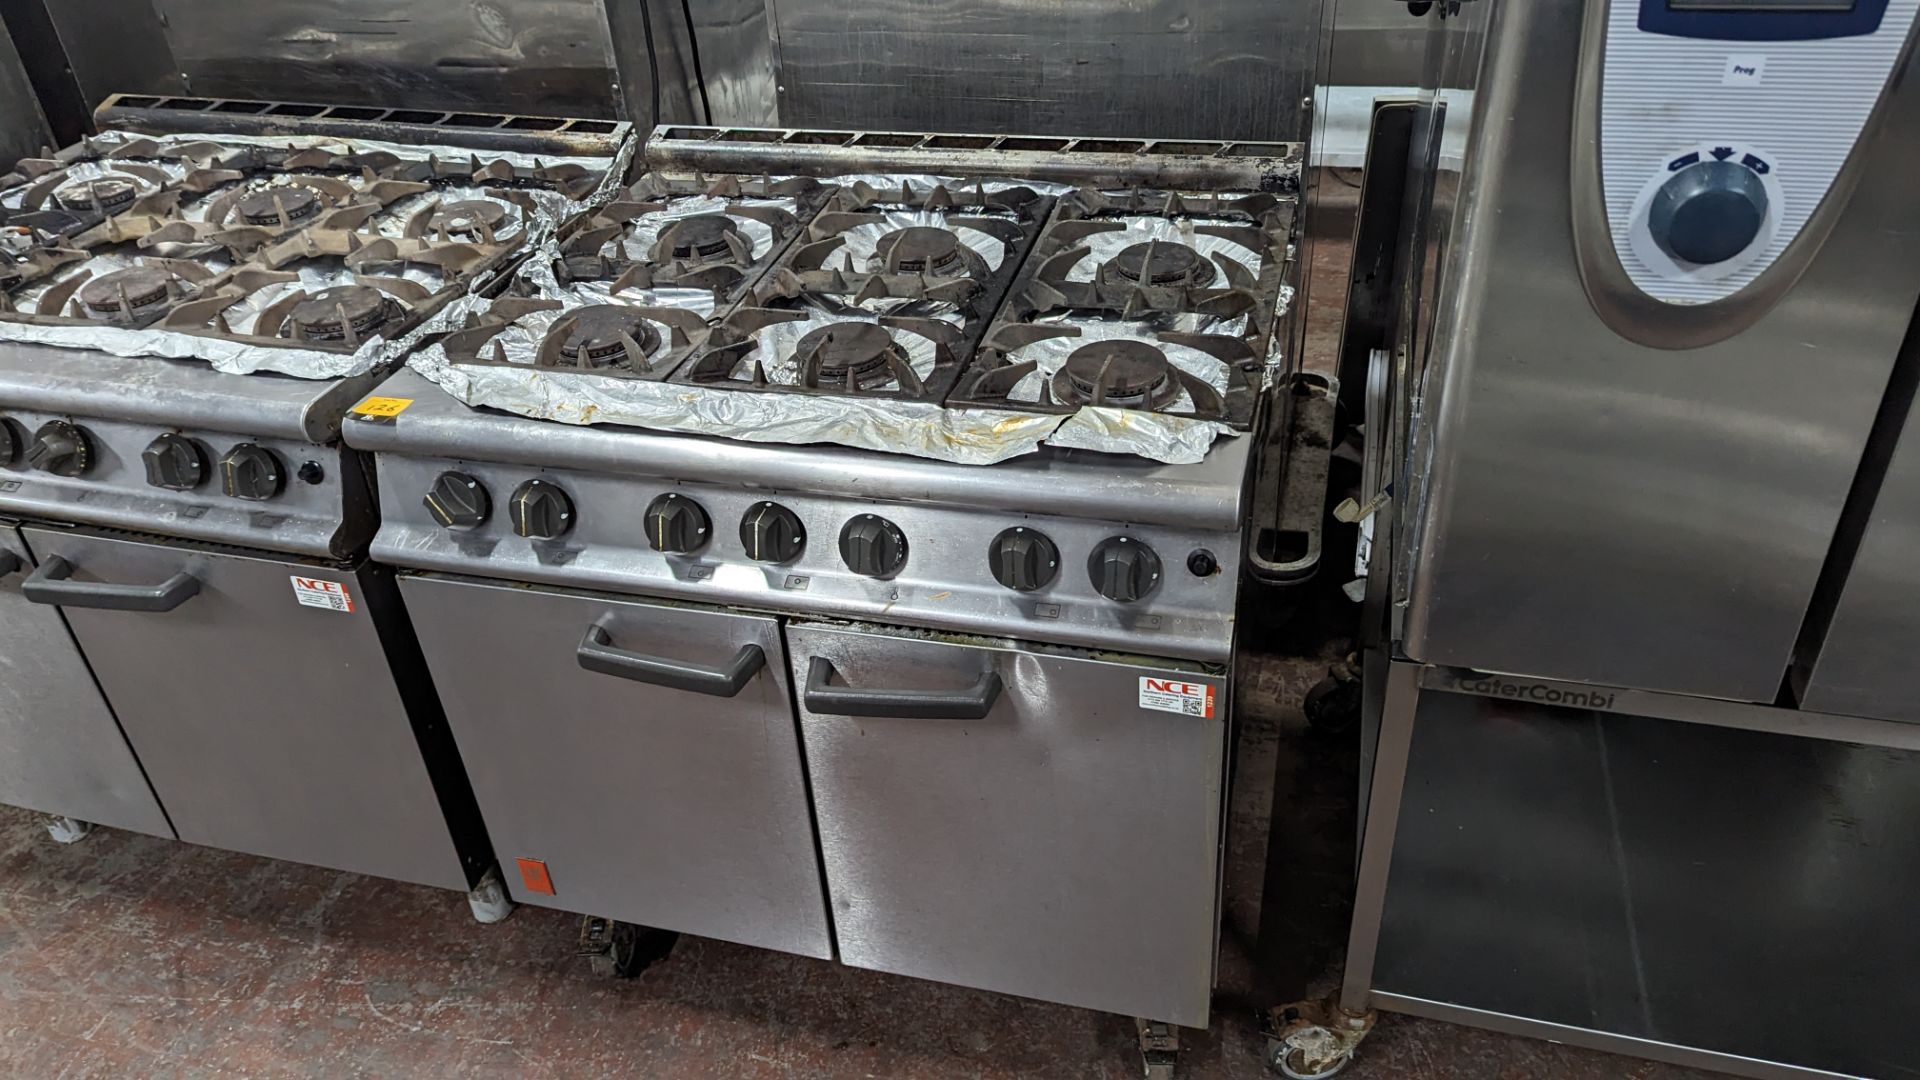 Falcon mobile stainless steel large 6 ring gas oven - Image 2 of 7